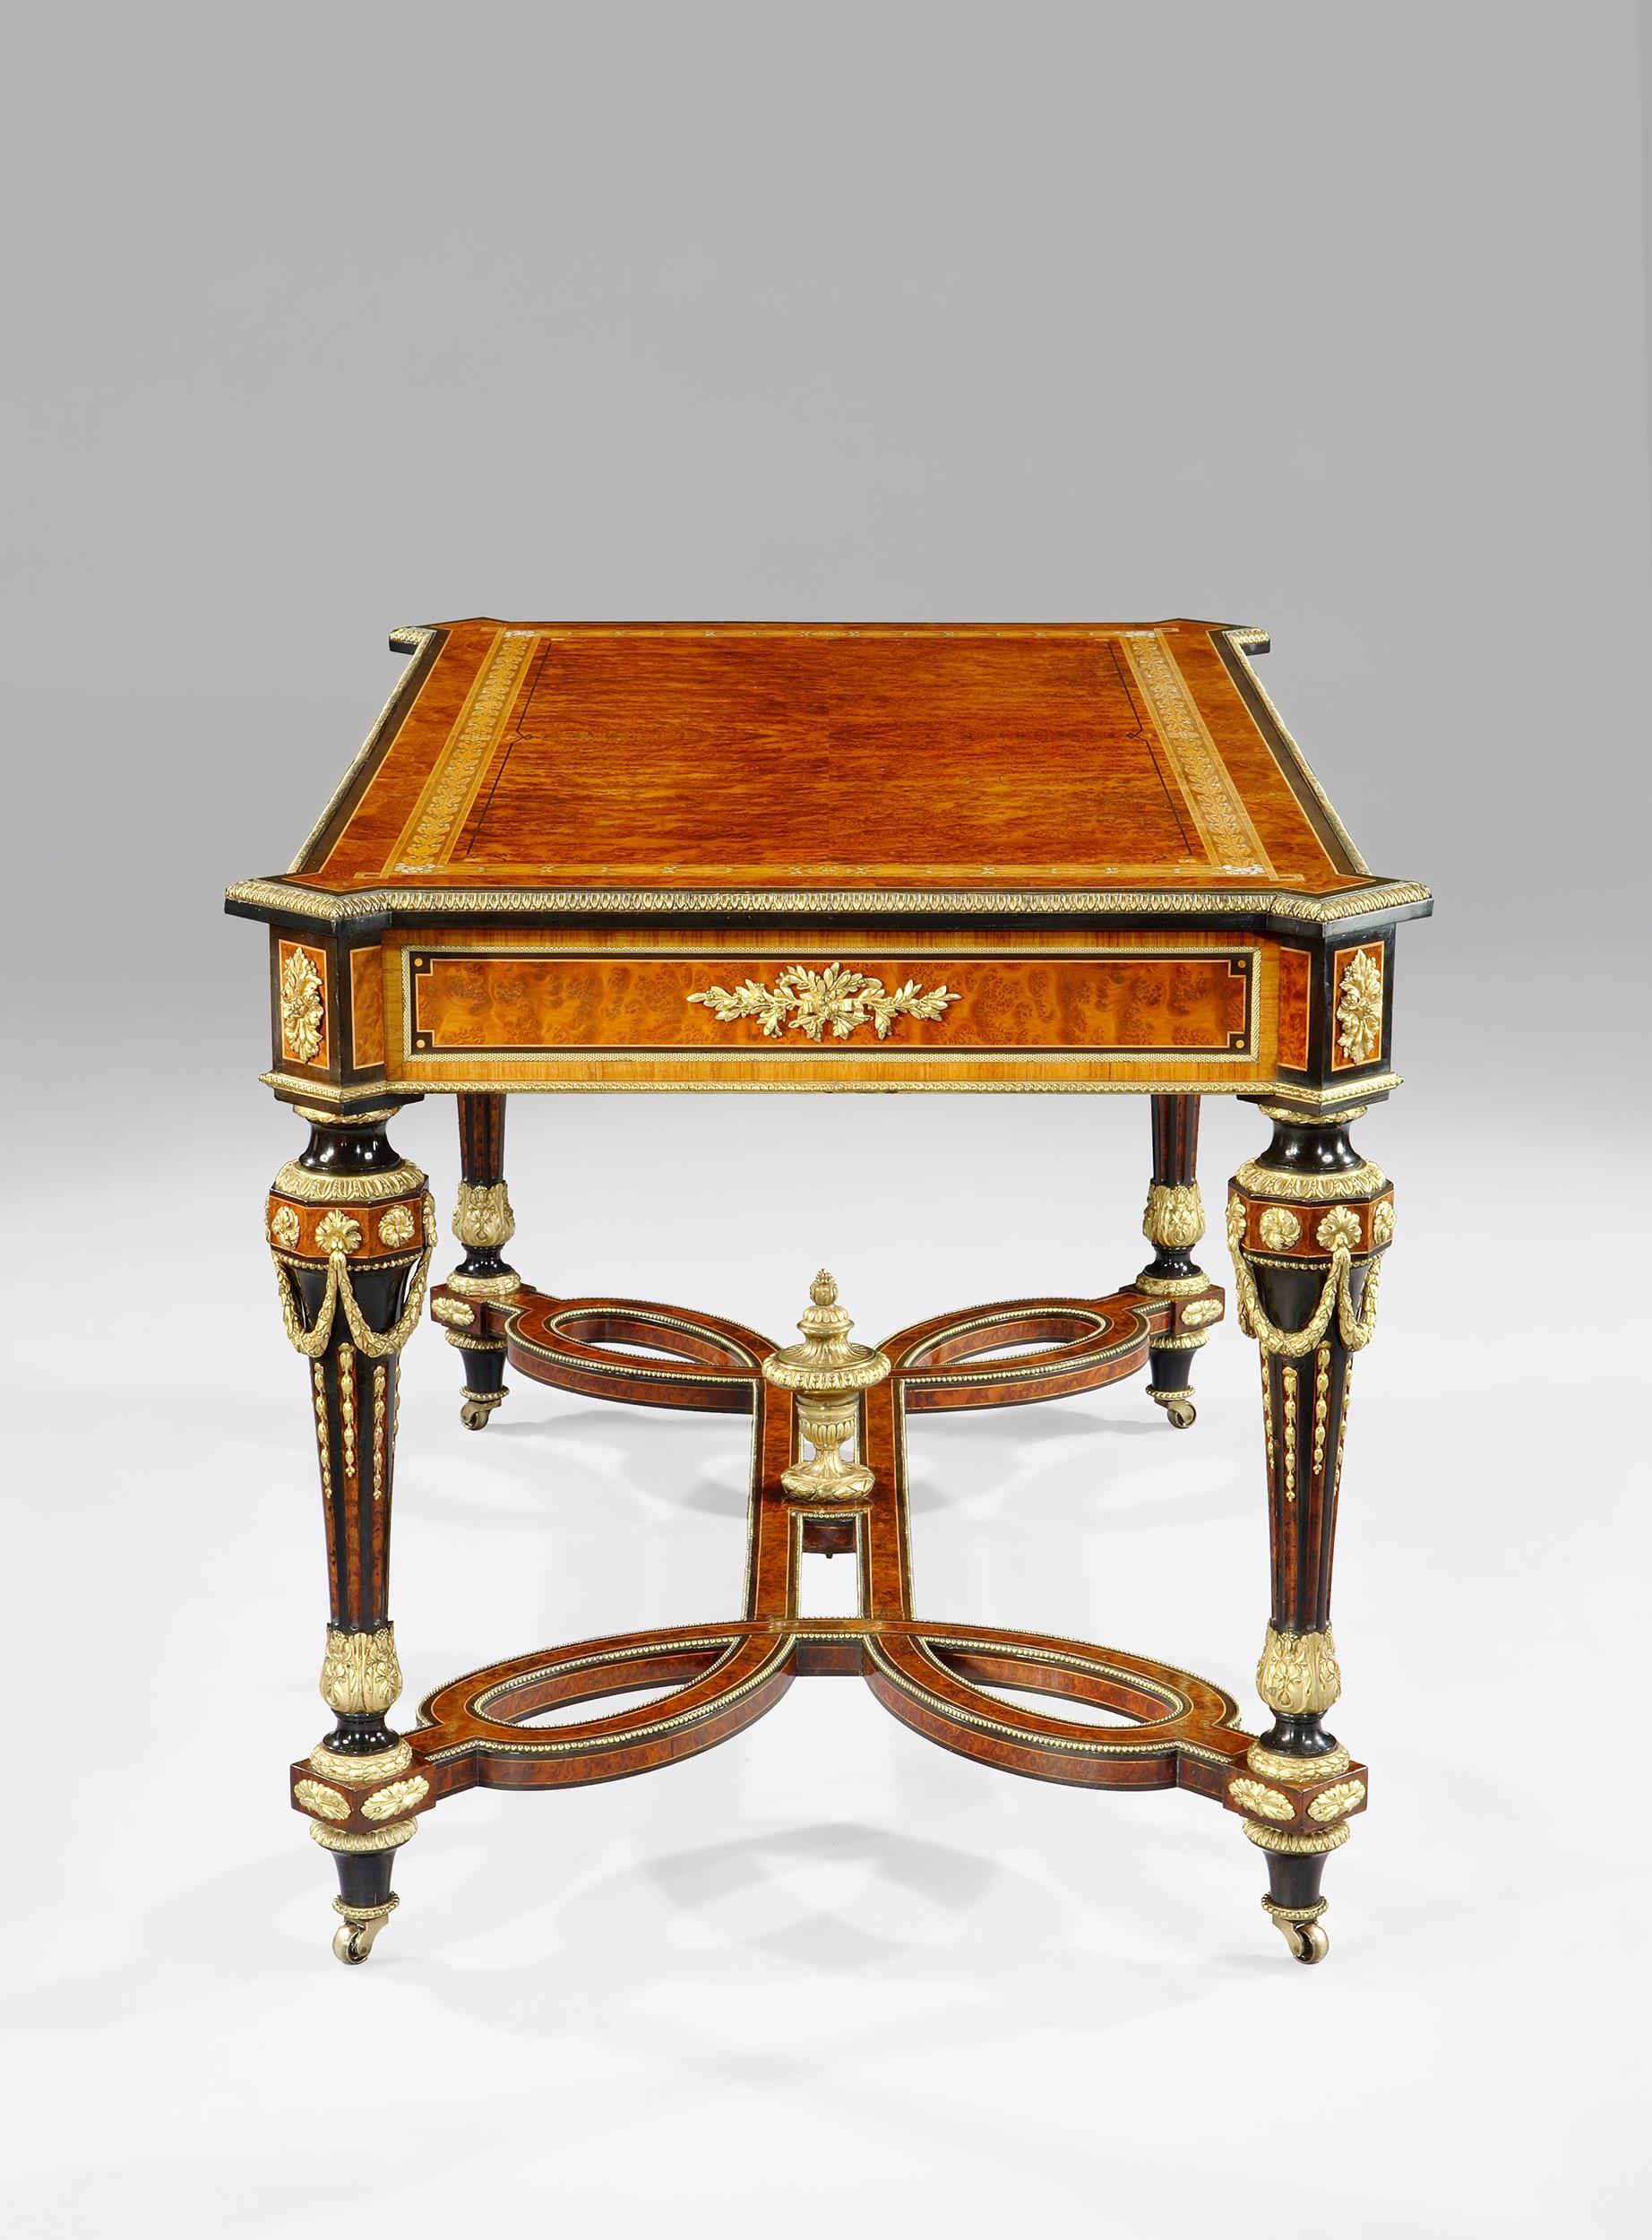 An exhibition quality centre table firmly attributed to Holland & Sons

Constructed in thuya wood, with sycamore, bois de Violette, boxwood and various woods utilised in the inlaywork, with entensive, finely cast and chased gilt bronze mounts.